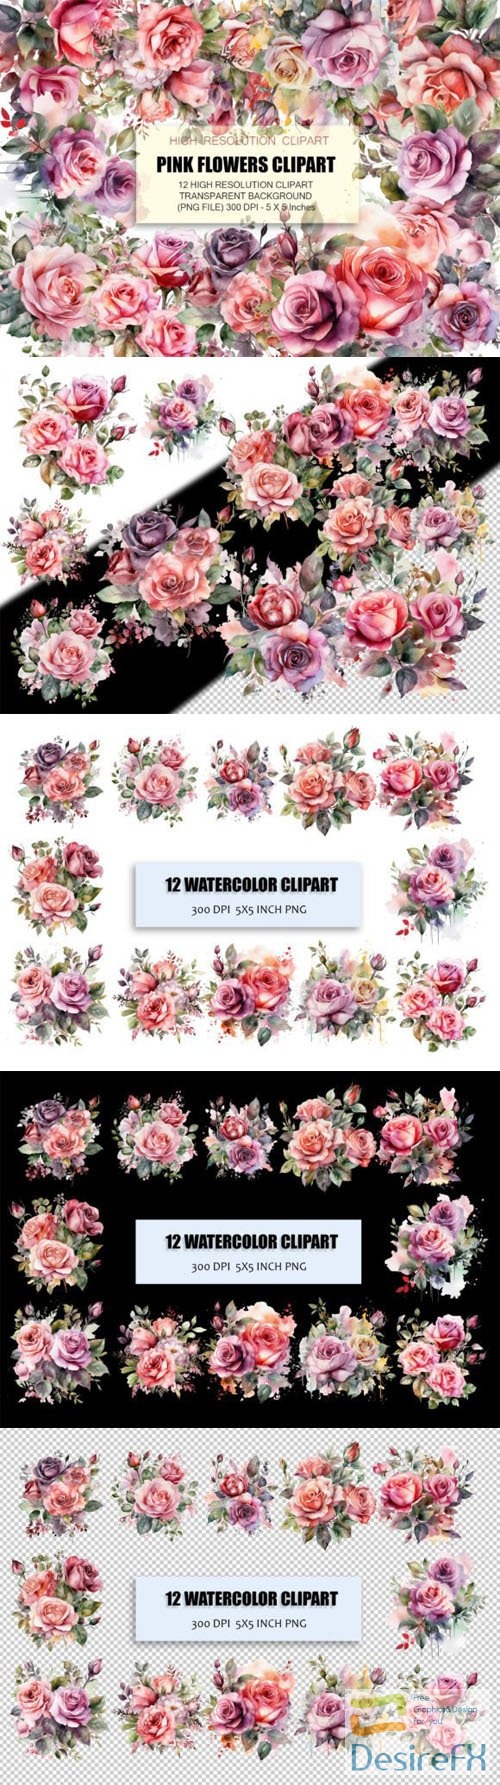 Watercolor Pink Flowers Clipart Collection